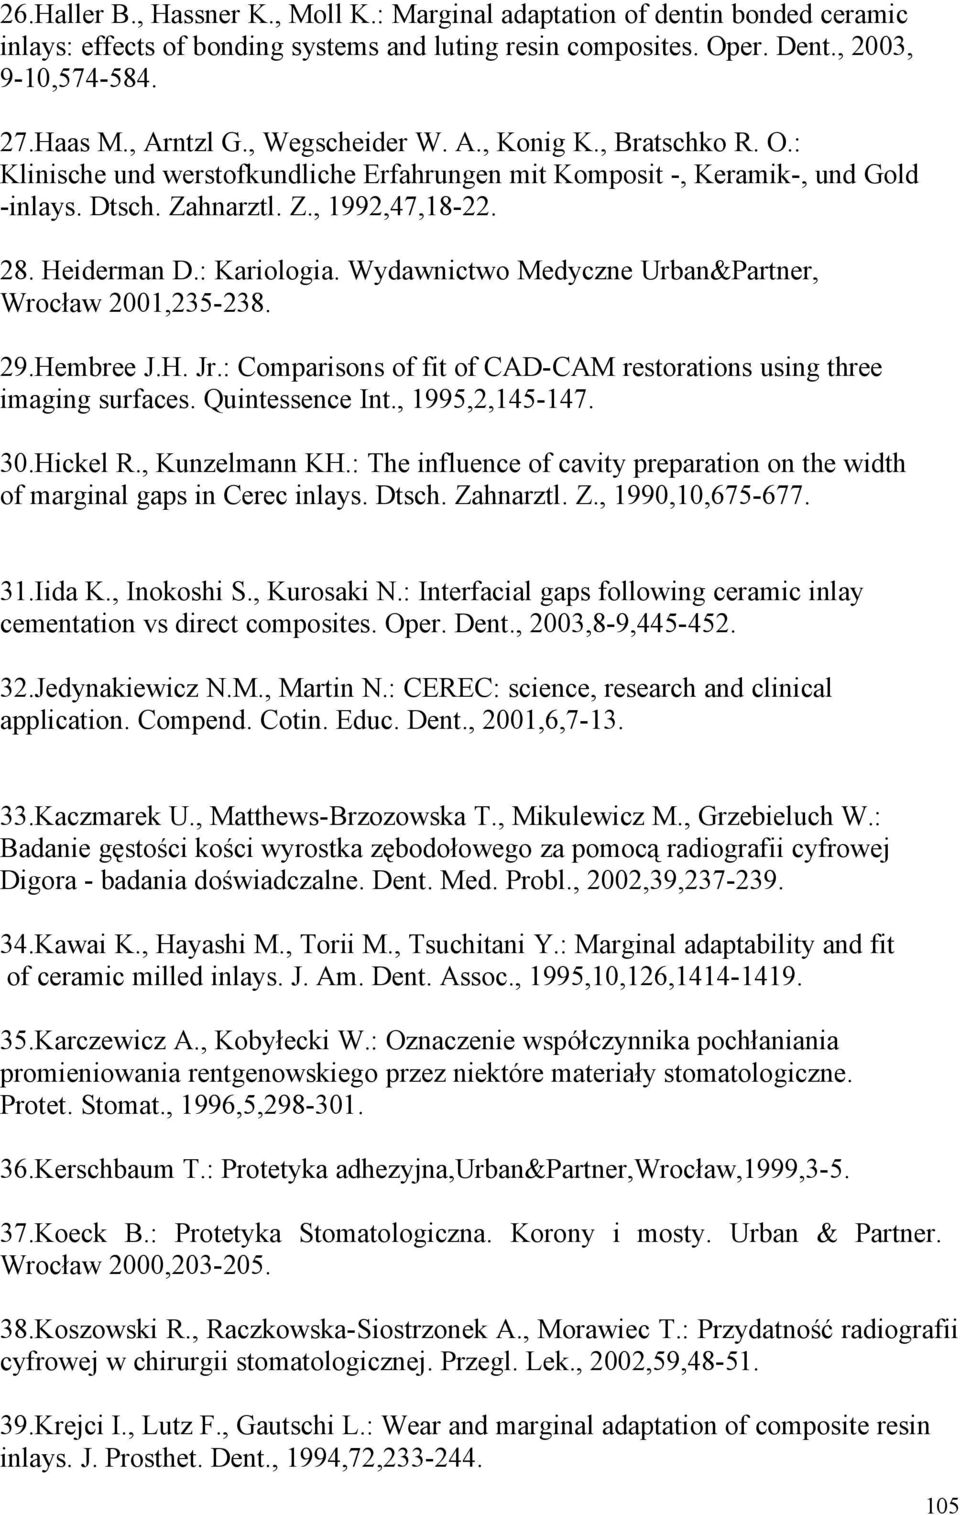 : Kariologia. Wydawnictwo Medyczne Urban&Partner, Wrocław 2001,235-238. 29.Hembree J.H. Jr.: Comparisons of fit of CAD-CAM restorations using three imaging surfaces. Quintessence Int., 1995,2,145-147.